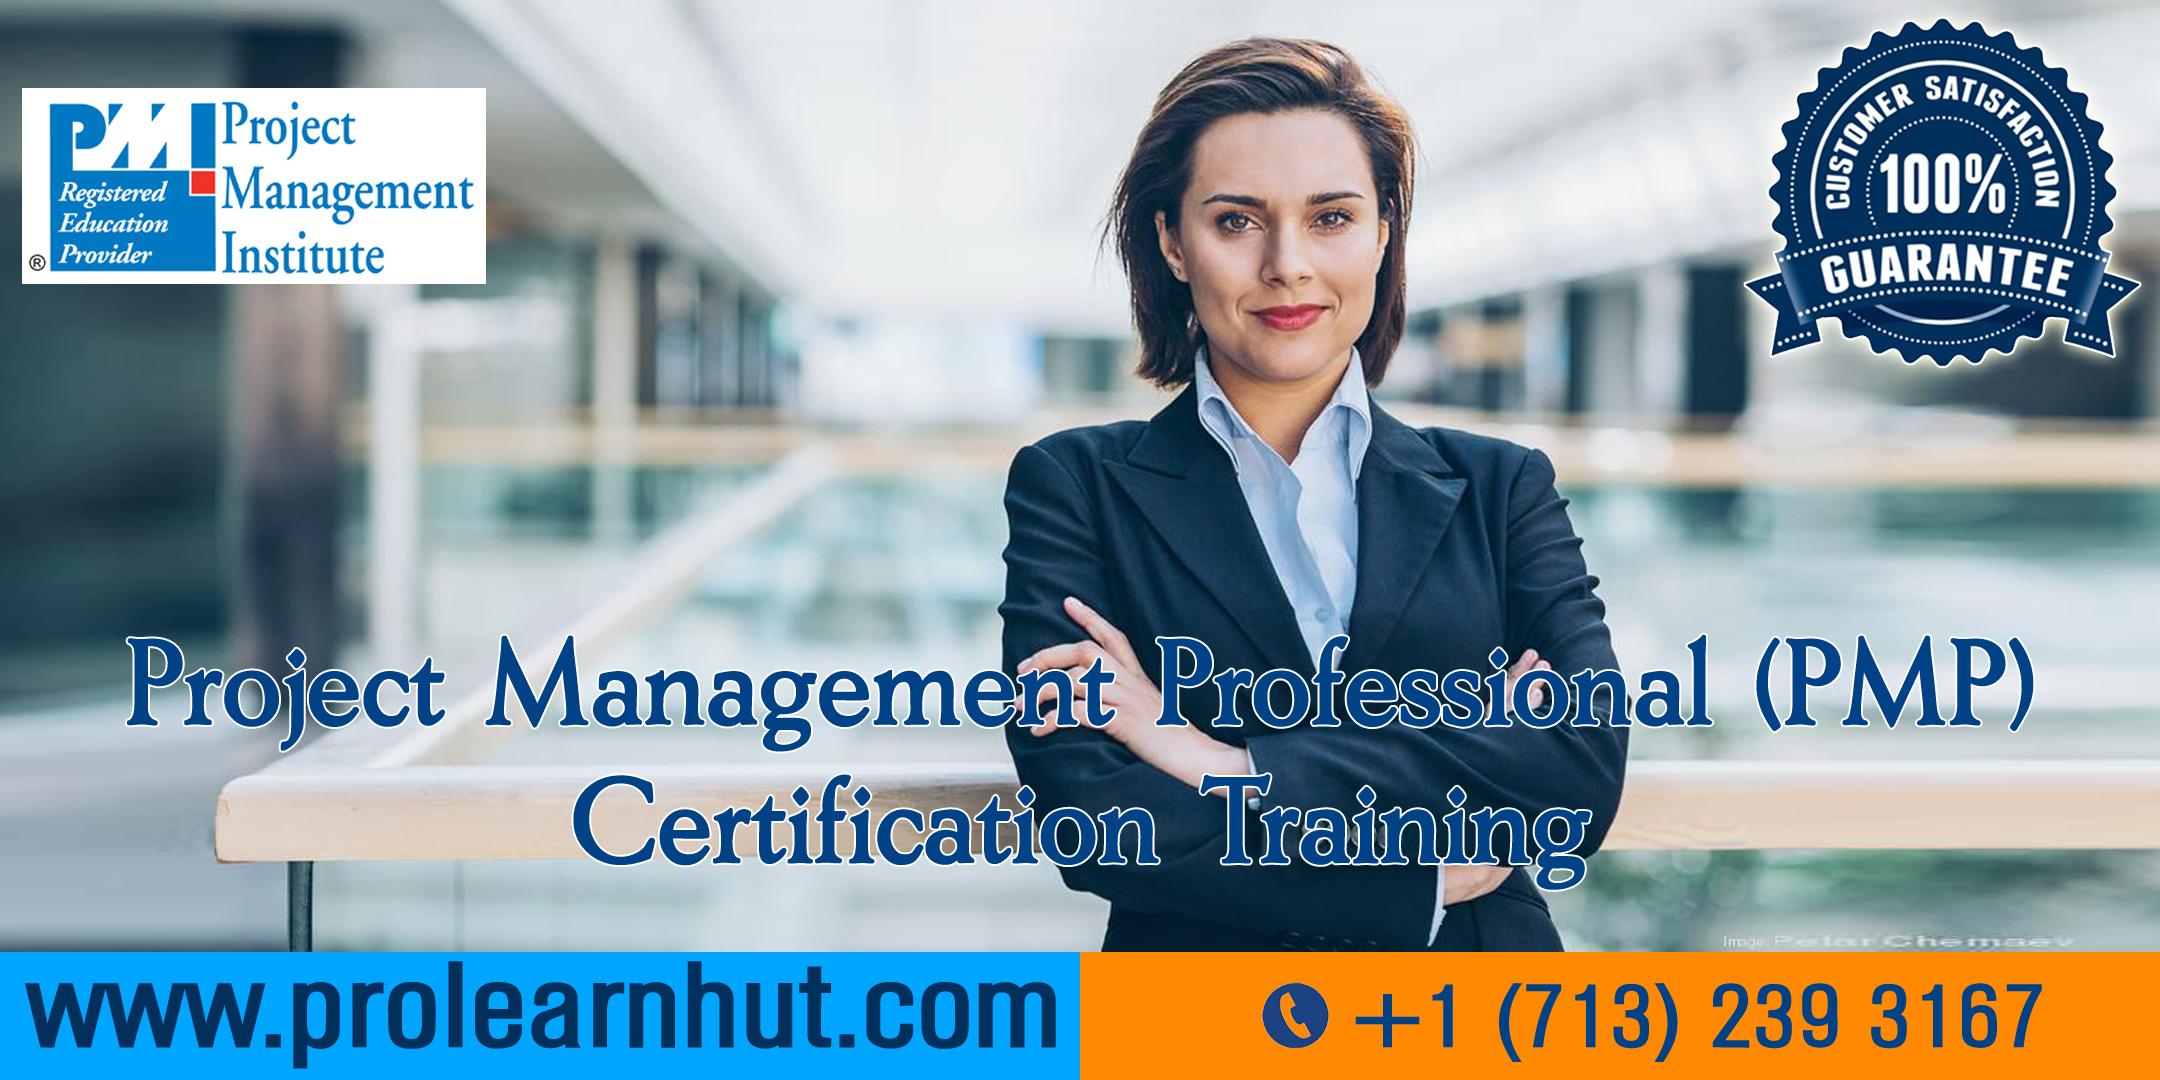 PMP Certification | Project Management Certification| PMP Training in Greensboro, NC | ProLearnHut